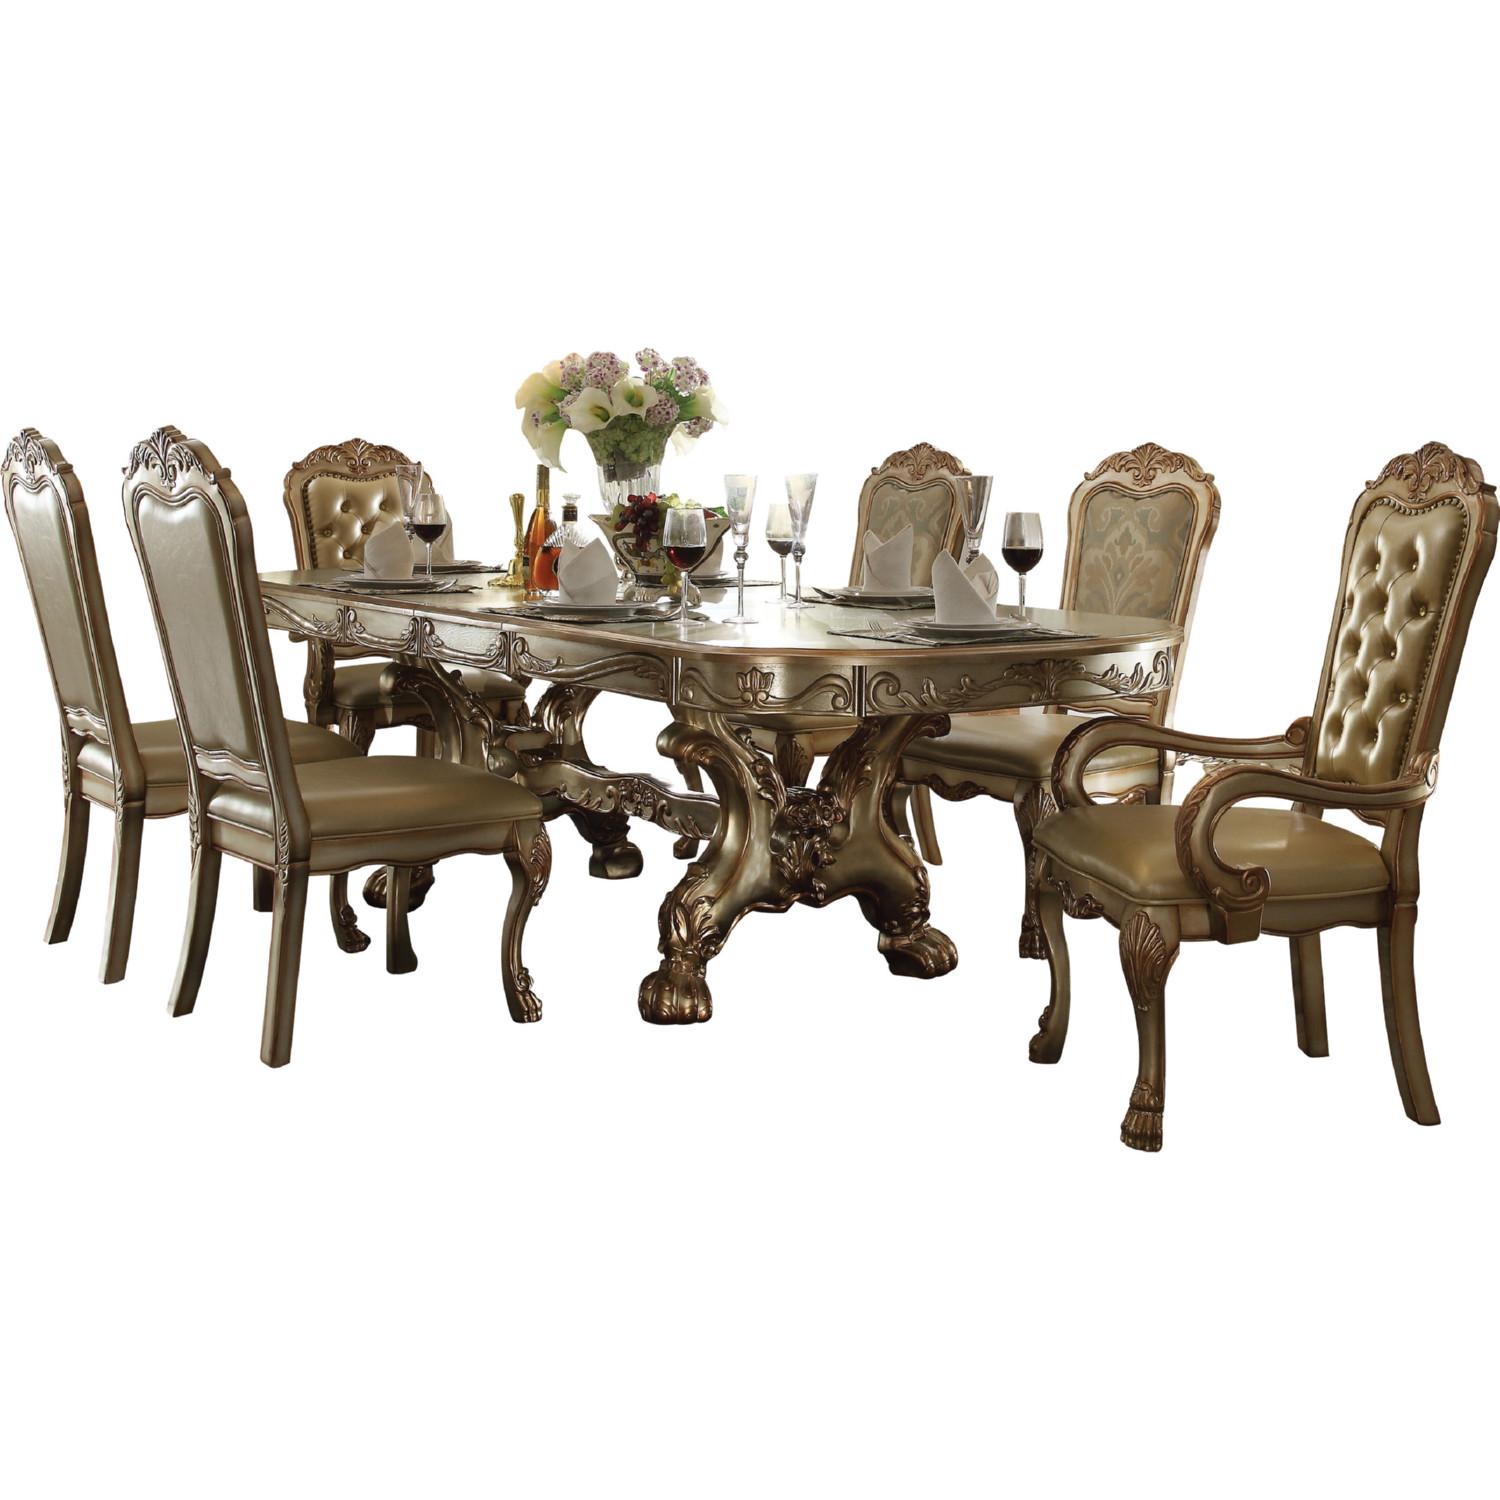 Classic, Traditional Dining Table Set Dresden 63150 63150 Dresden-Set-9 in Bone, Gold Polyurethane